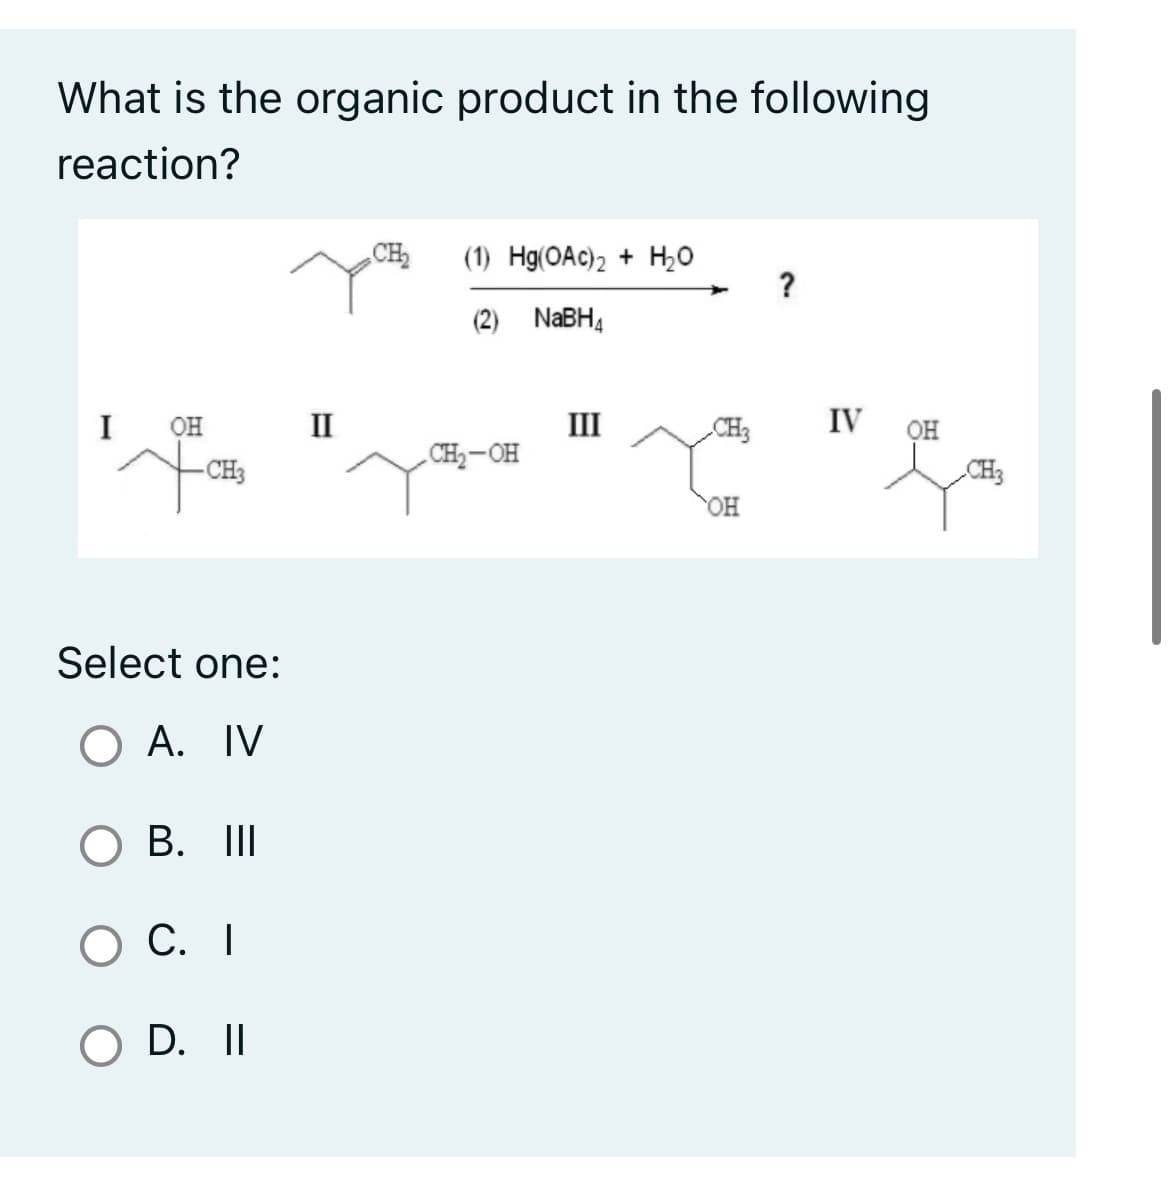 What is the organic product in the following
reaction?
I OH II
Fo
-CH3
Select one:
O A. IV
O B. III
O C. I
O D. II
CH₂ (1) Hg(OAc)2 + H₂O
(2) NaBH₁
CH₂-OH
III
CH3
OH
?
IV OH
CH3